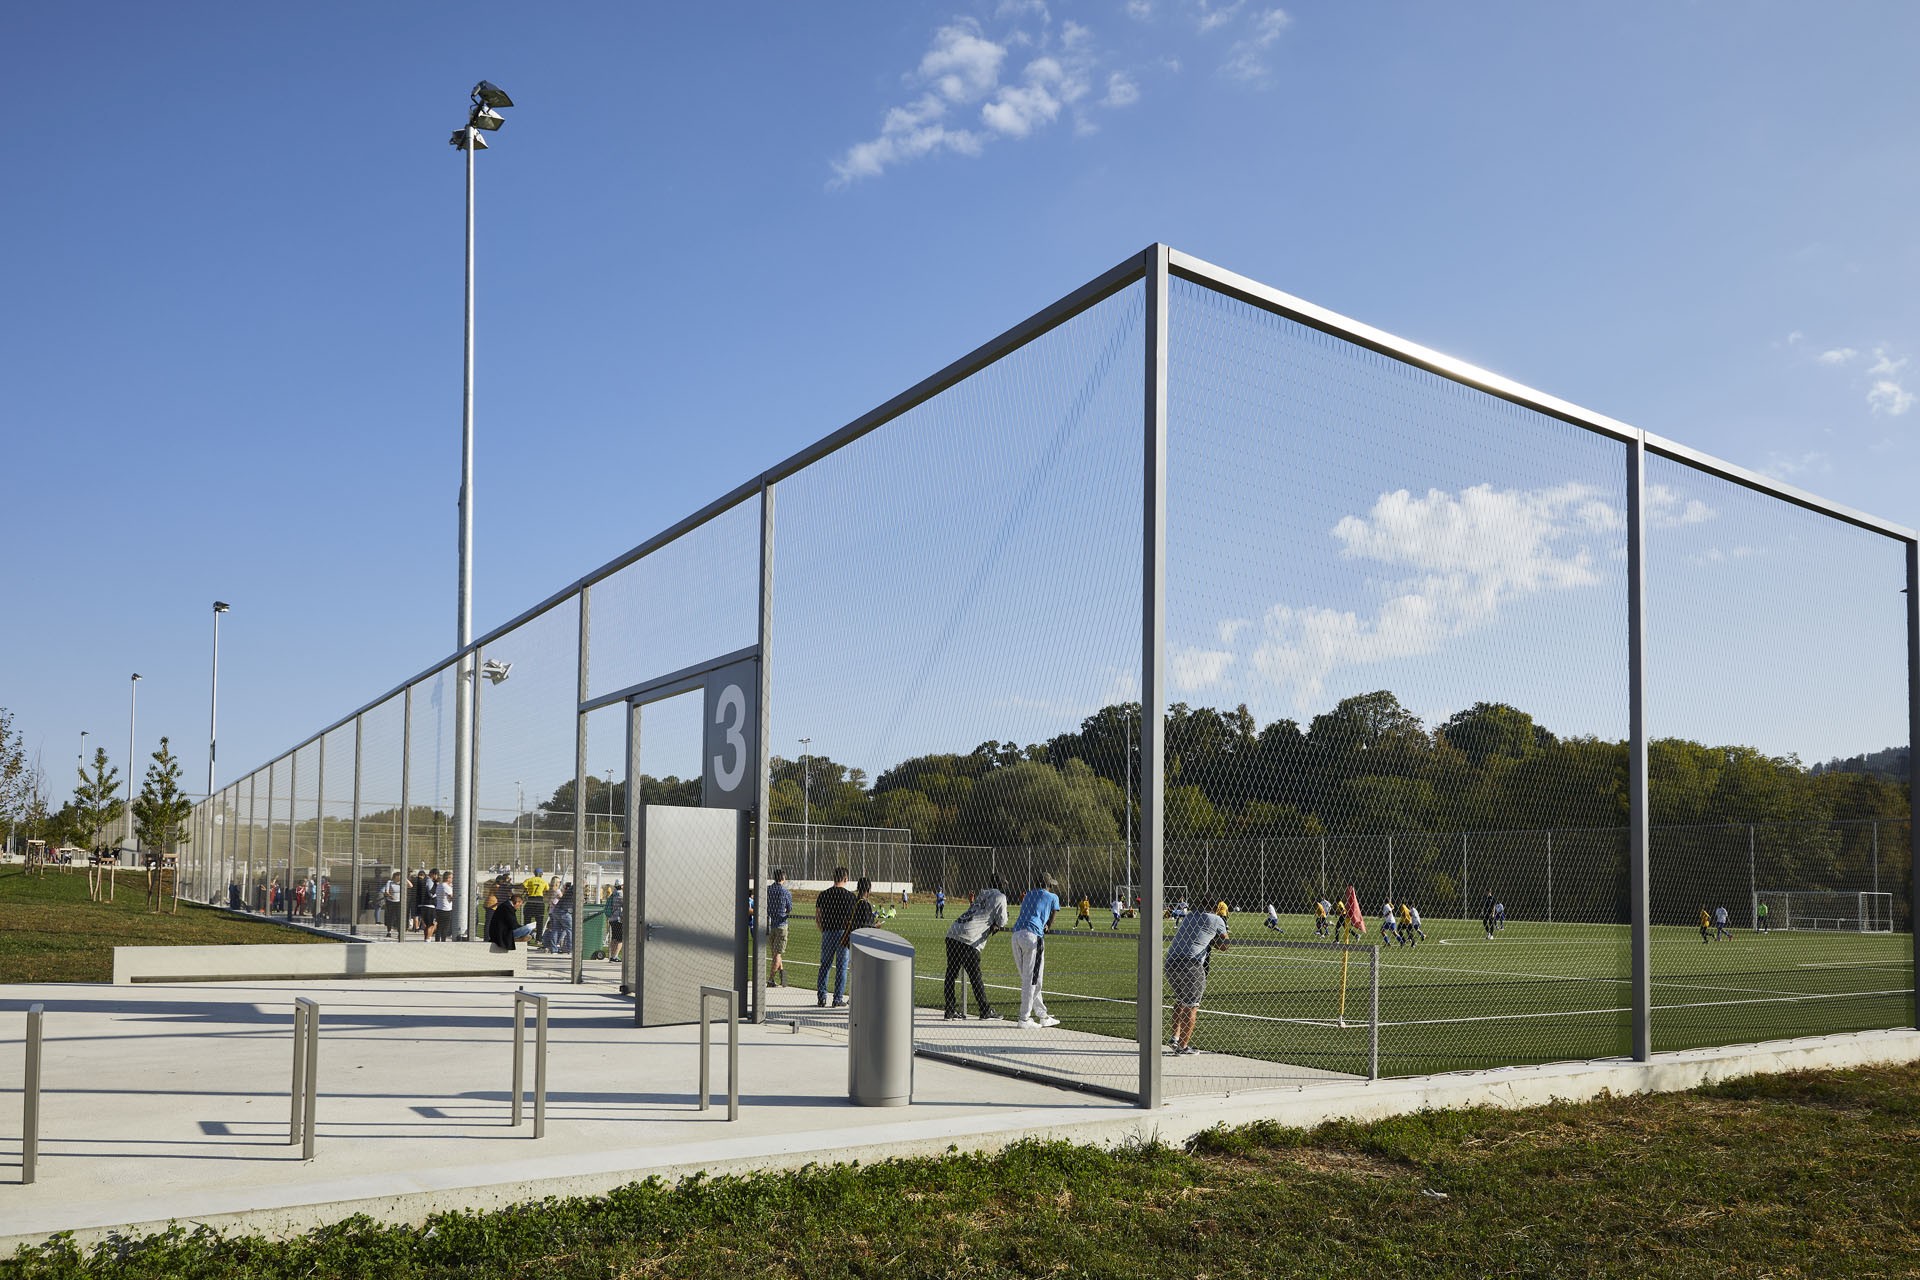 ball stop fence at a football field with nearly transparent mesh